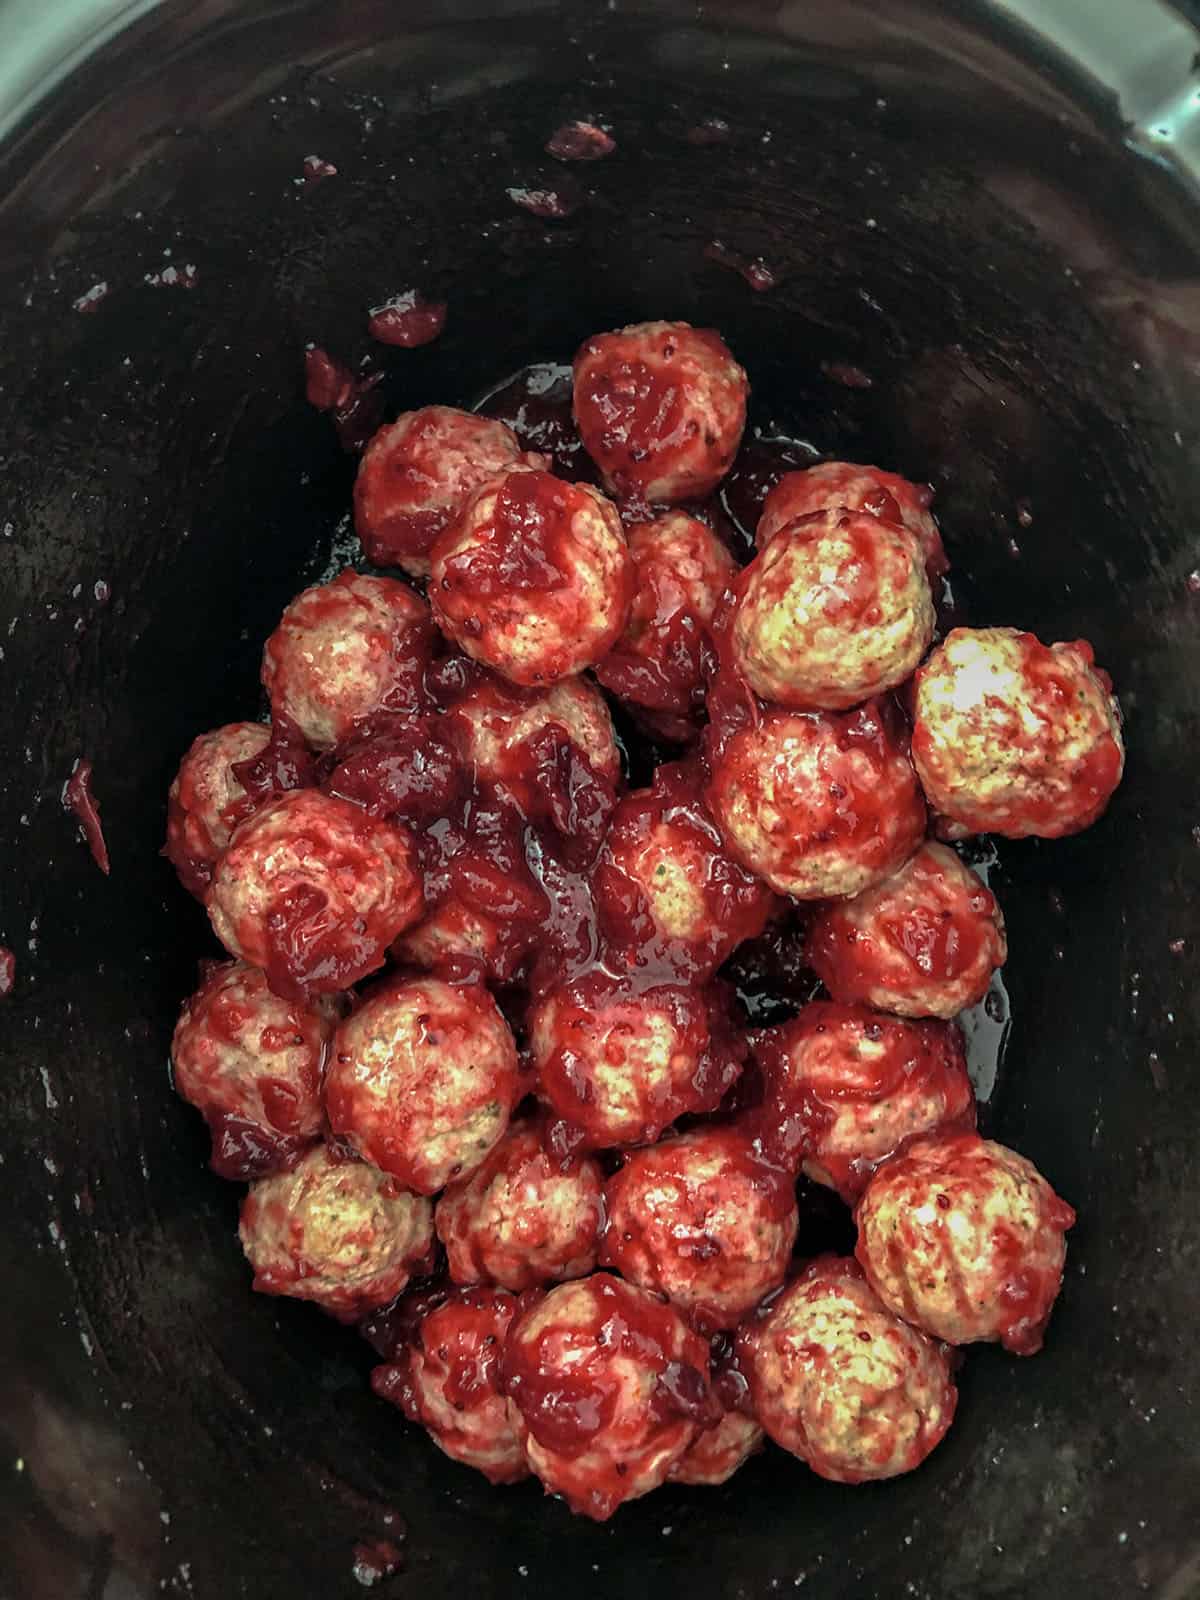 Cocktail meatballs in cranberry sauce in a crockpot.